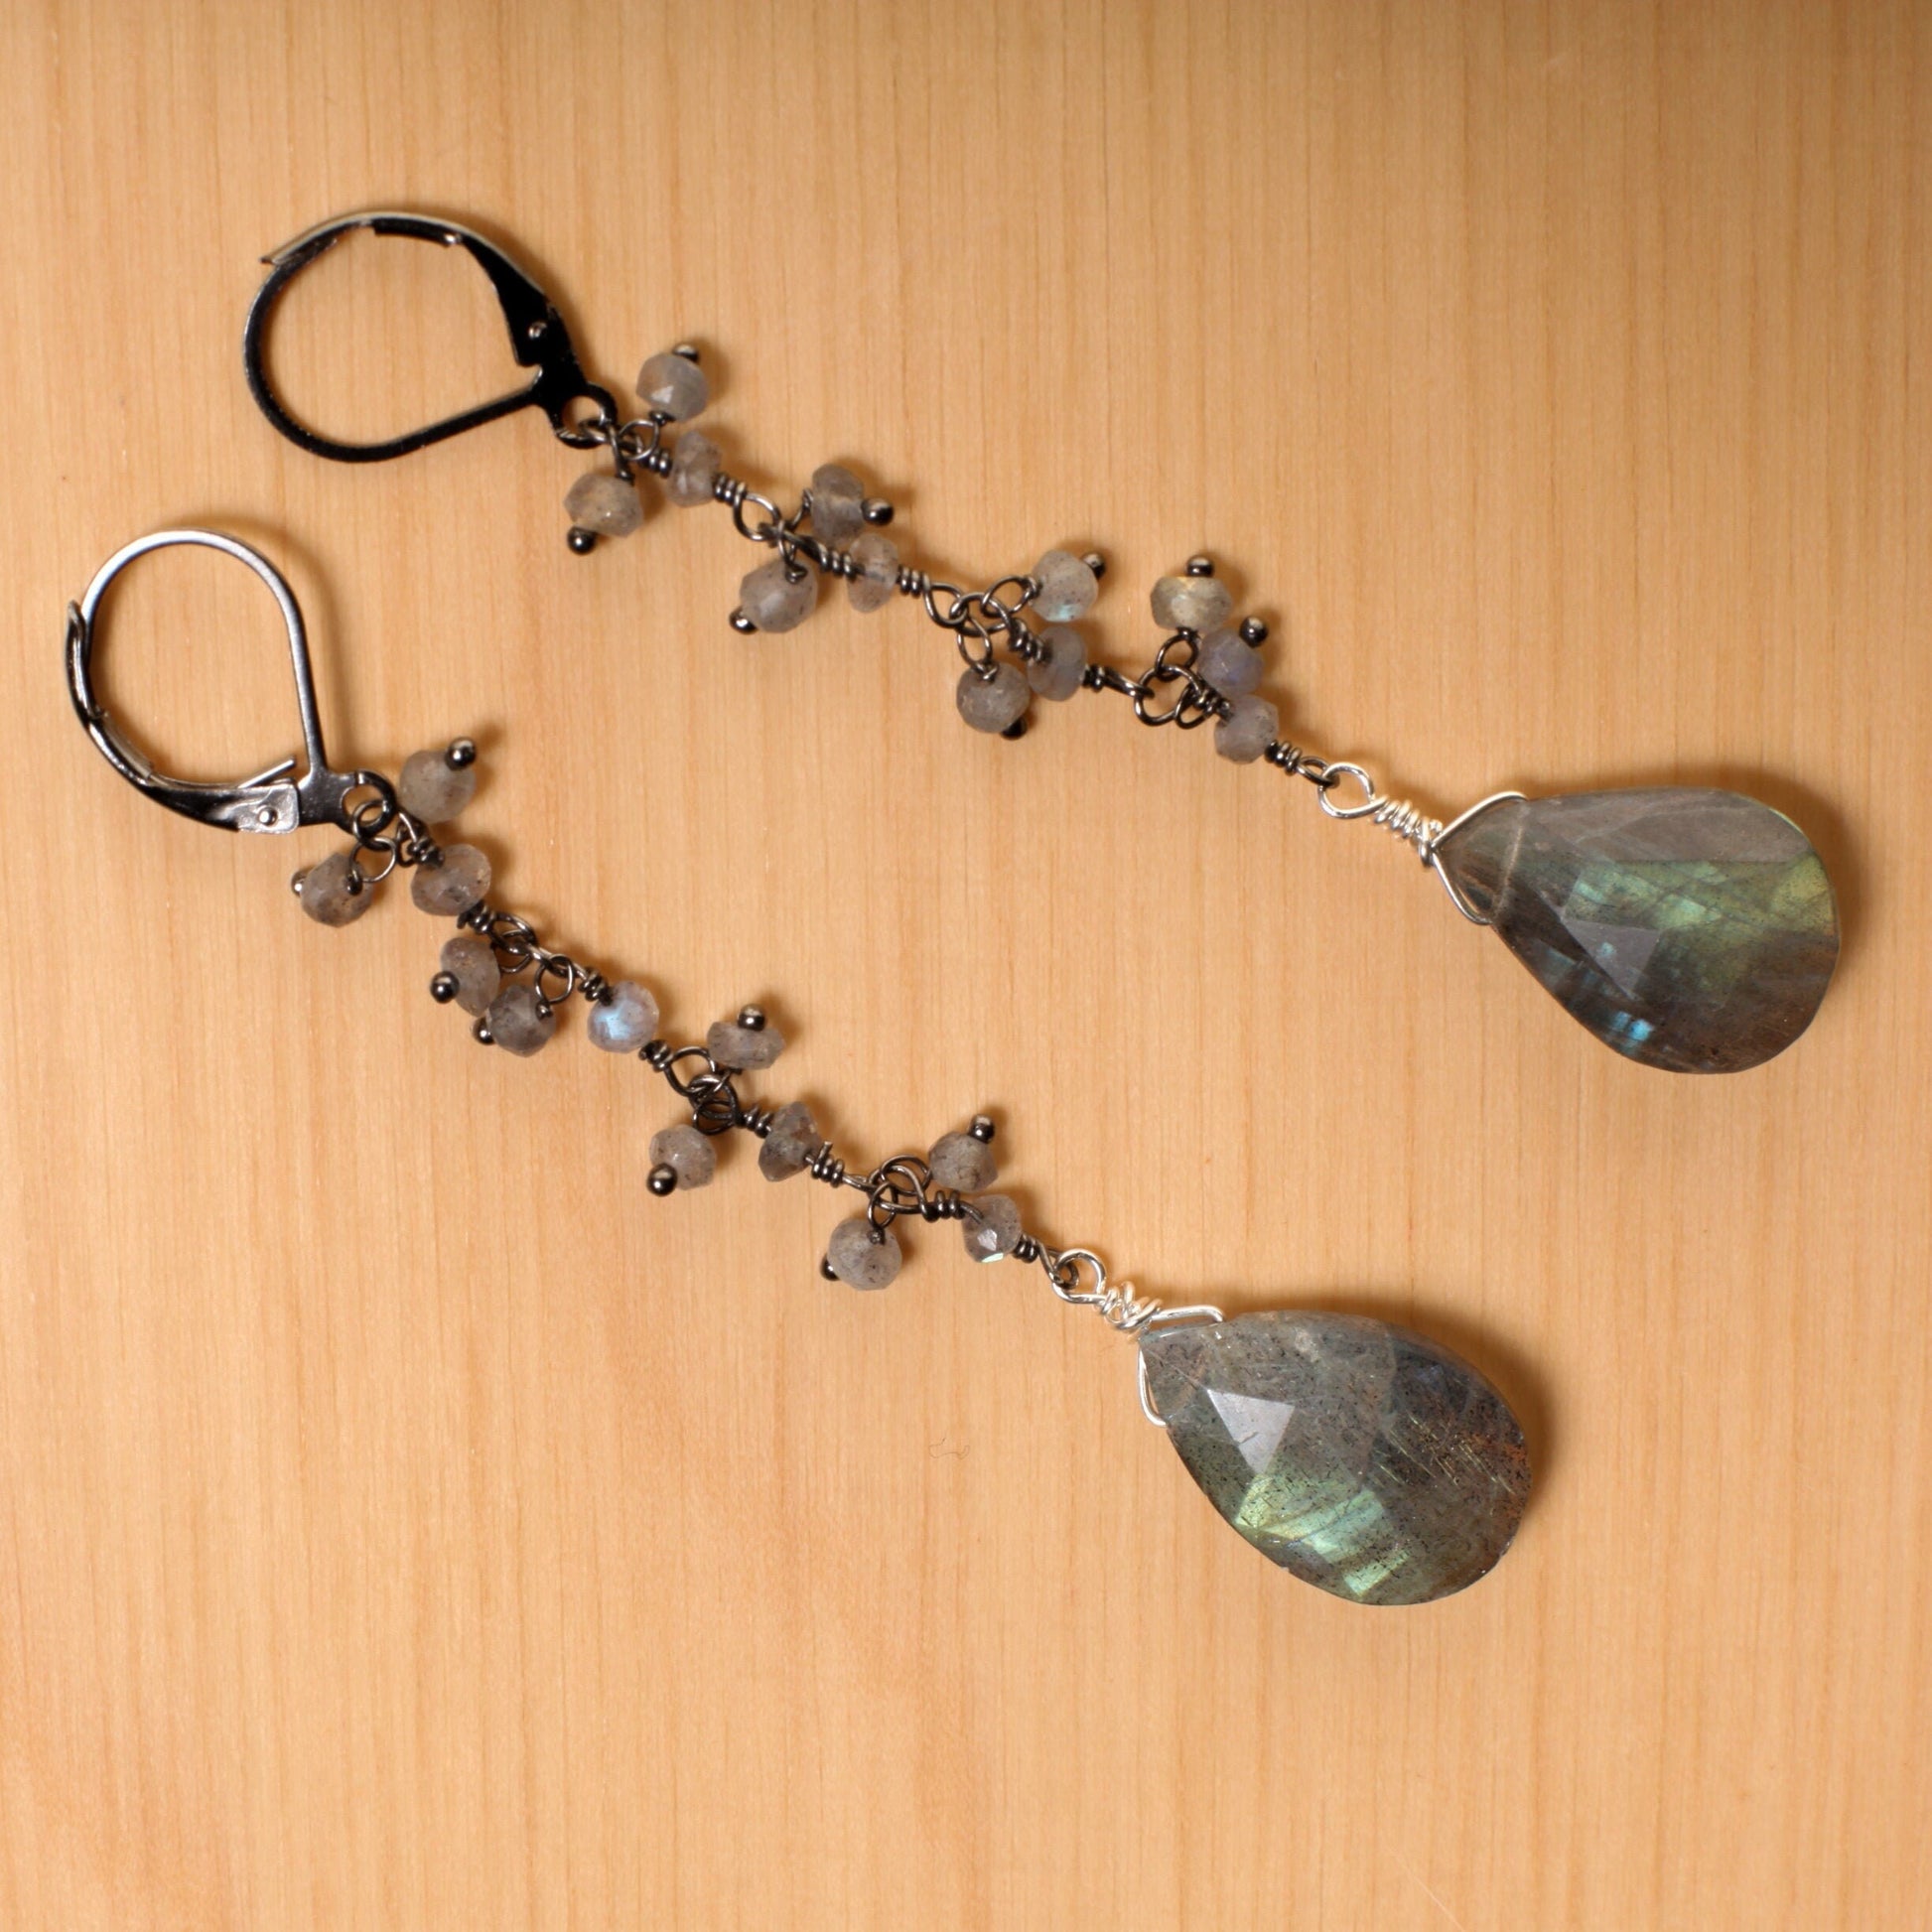 Labradorite Earrings Dangling Oxidized Silver Wire Wrap Faceted Pear Drop with Clusters in Gun Metal Leverback, Boho, Handmade, Gift